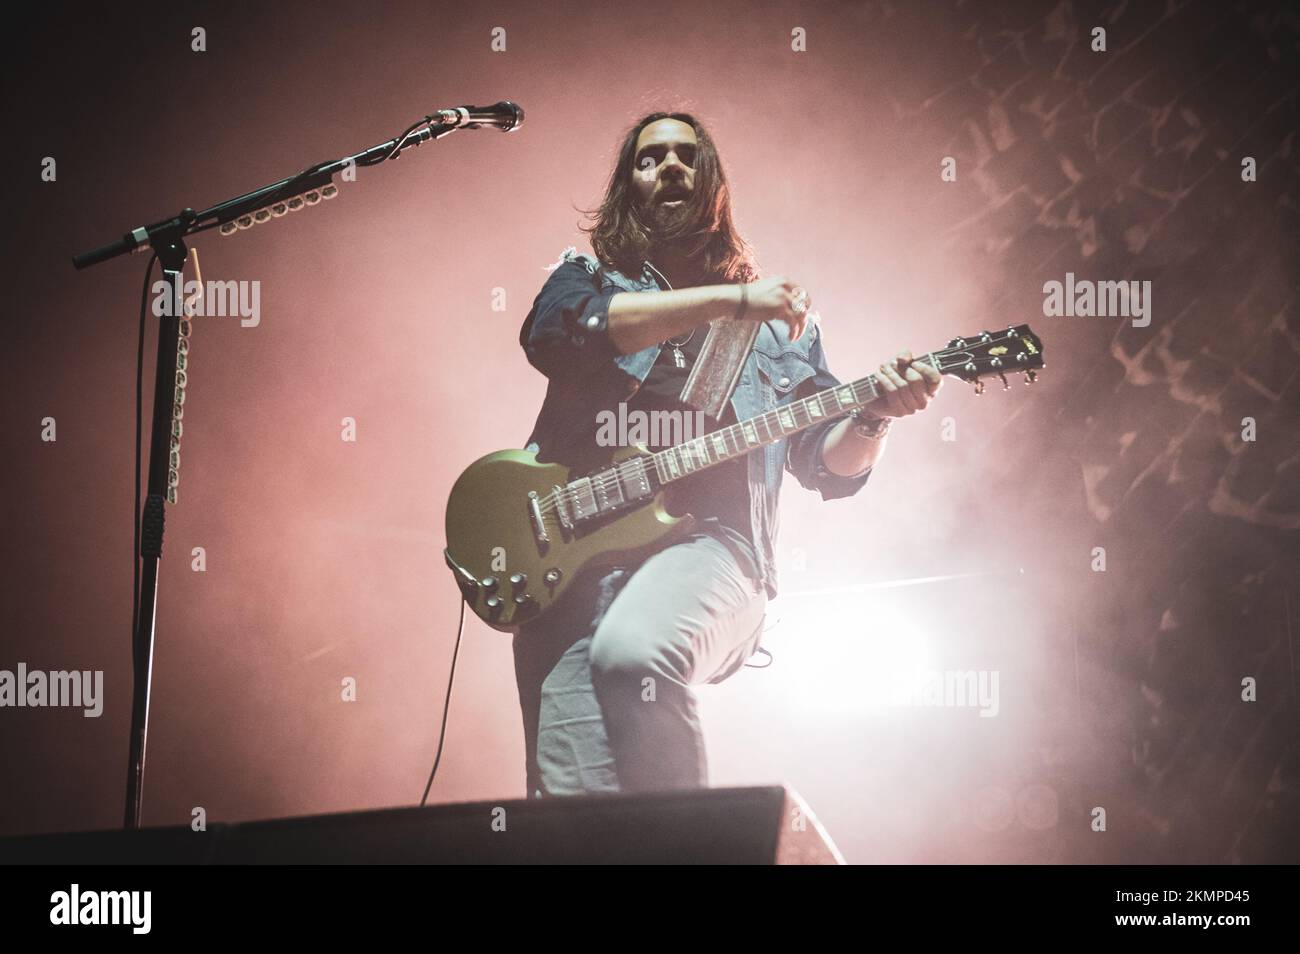 ITALY, MILAN, NOVEMBER 25TH 2022: The American guitarist Joe Hottinger, lead guitarist of the rock band Halestorm, performing live on stage in Milan, opening for the Alter Bridge “Pawns & Kings” European tour. Stock Photo